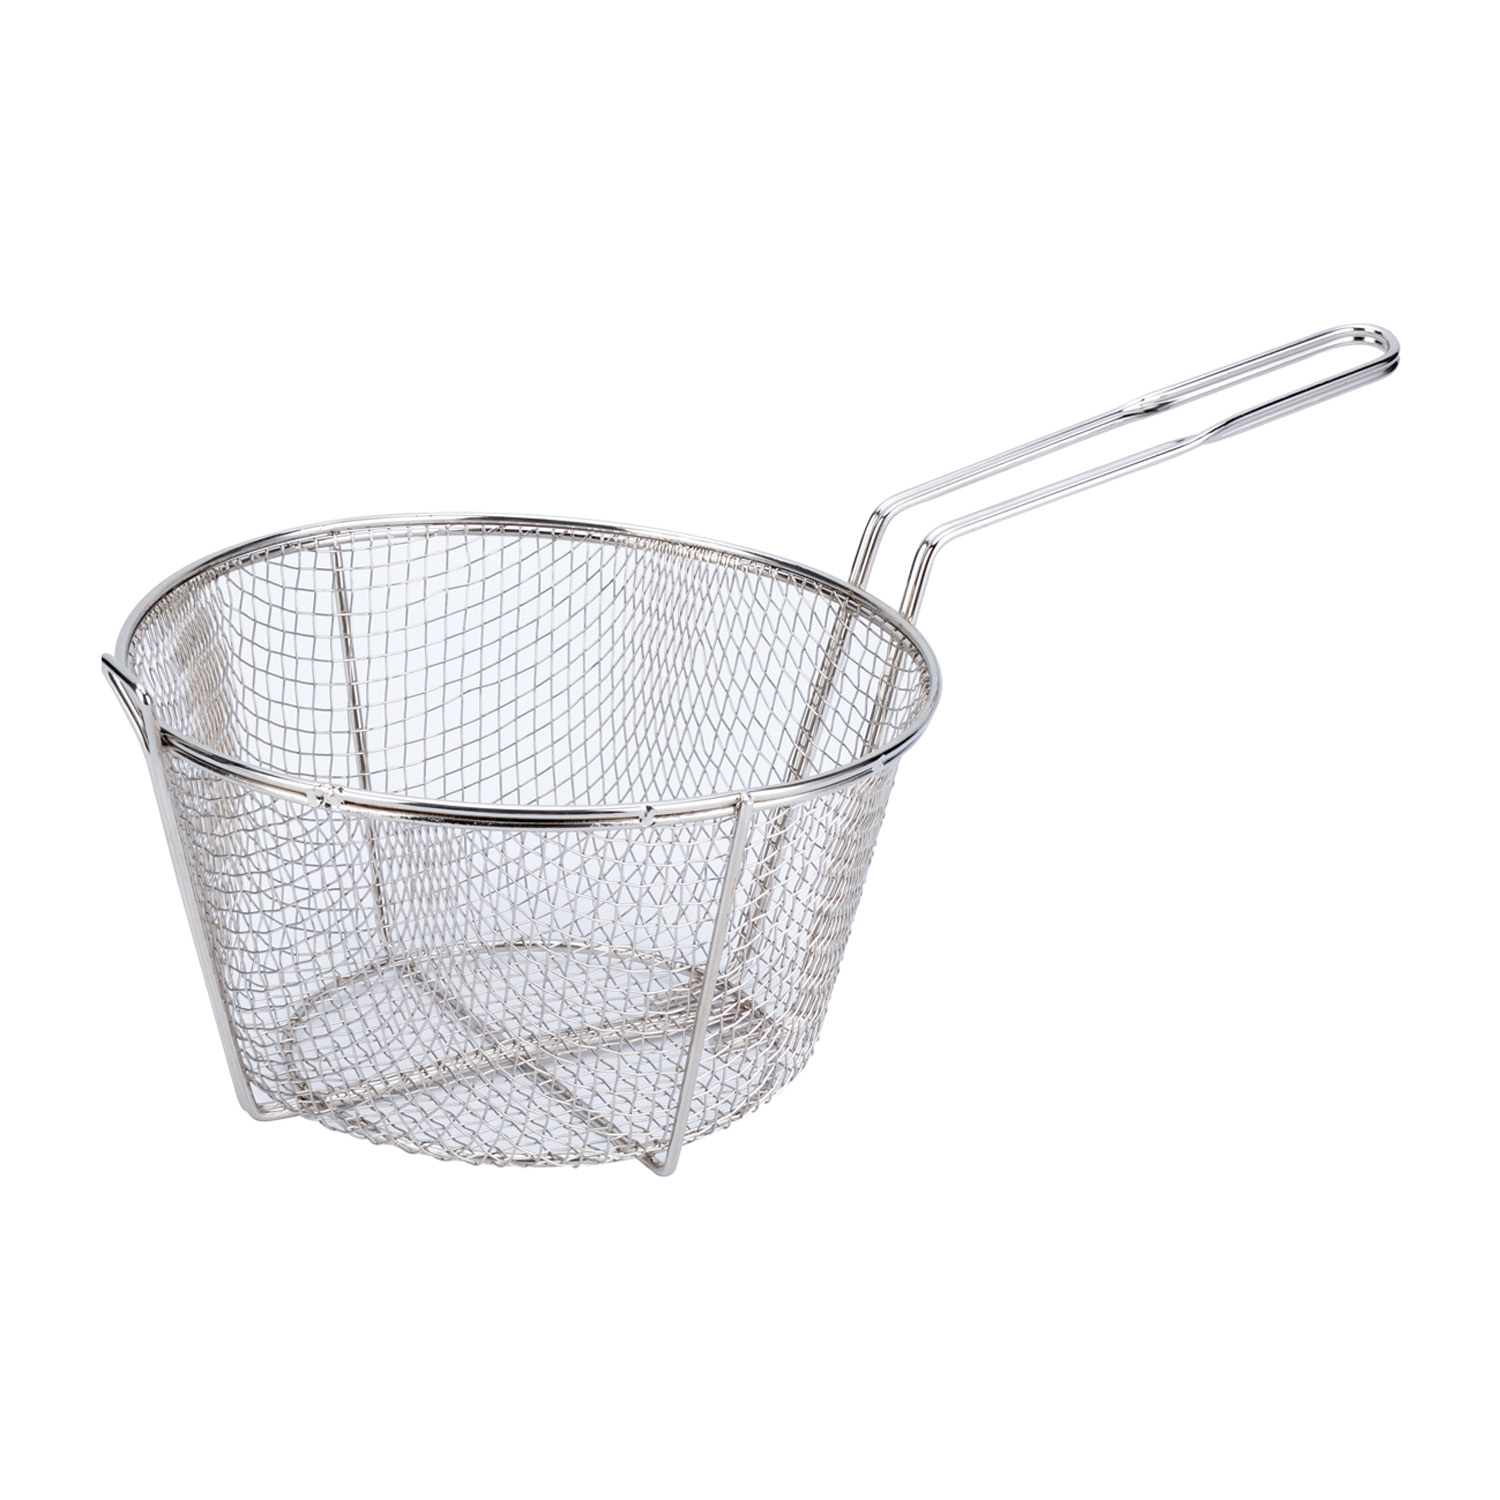 CAC China FBR4-8 Nickel-Plated Fry Basket, 1/4" Mesh Wire 8-1/2"Dia